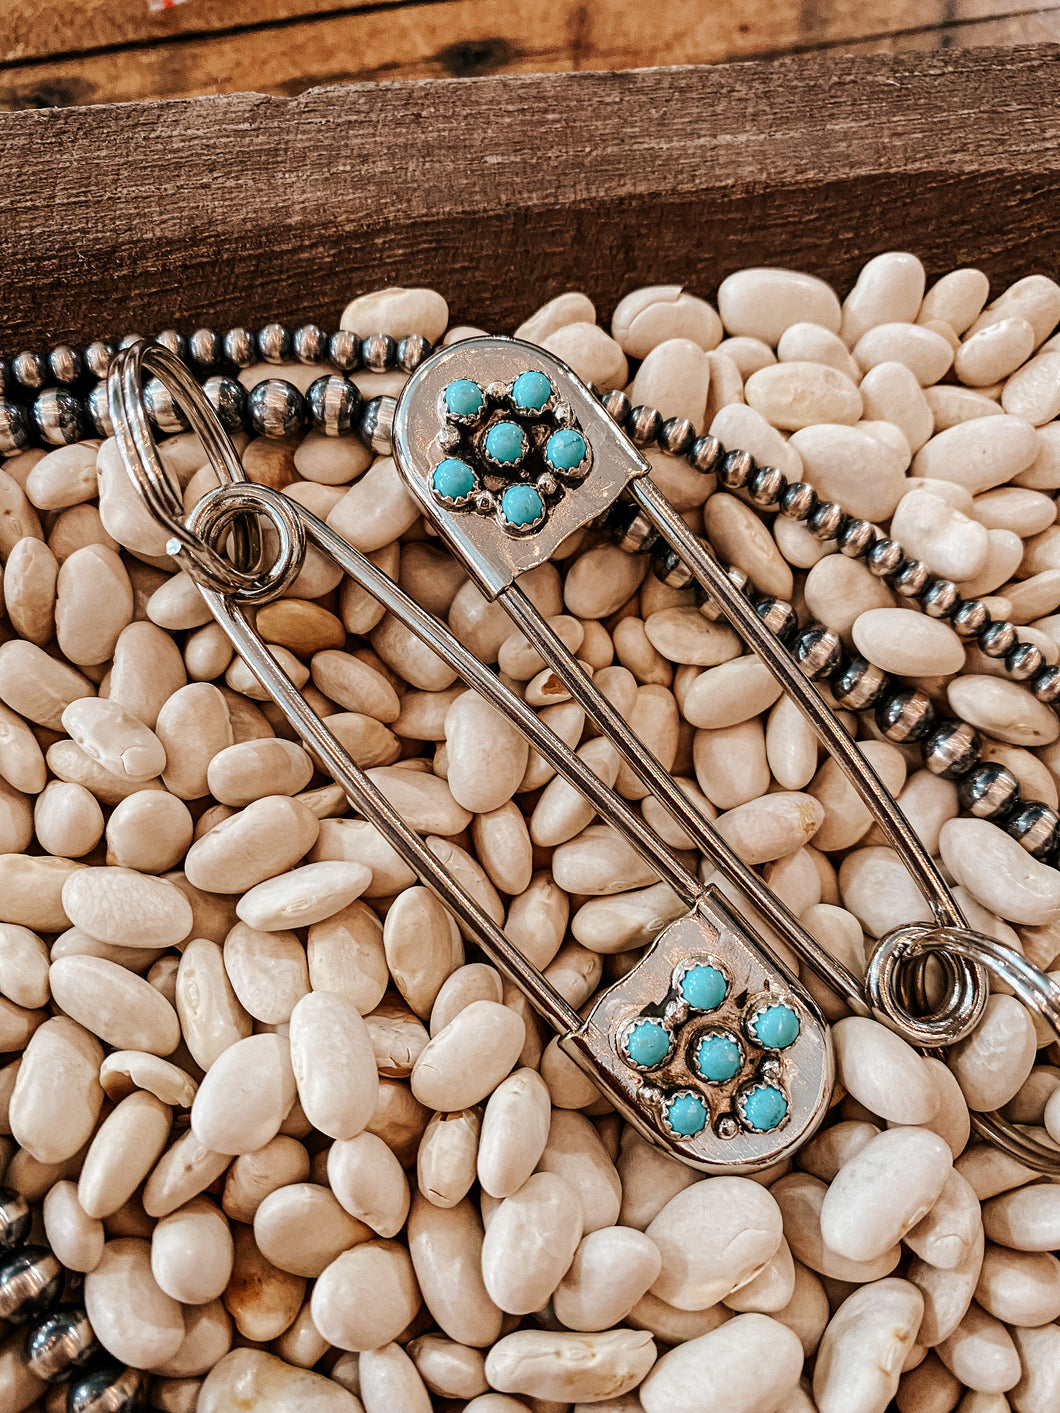 The Flower Turquoise Safety Pins Keychain